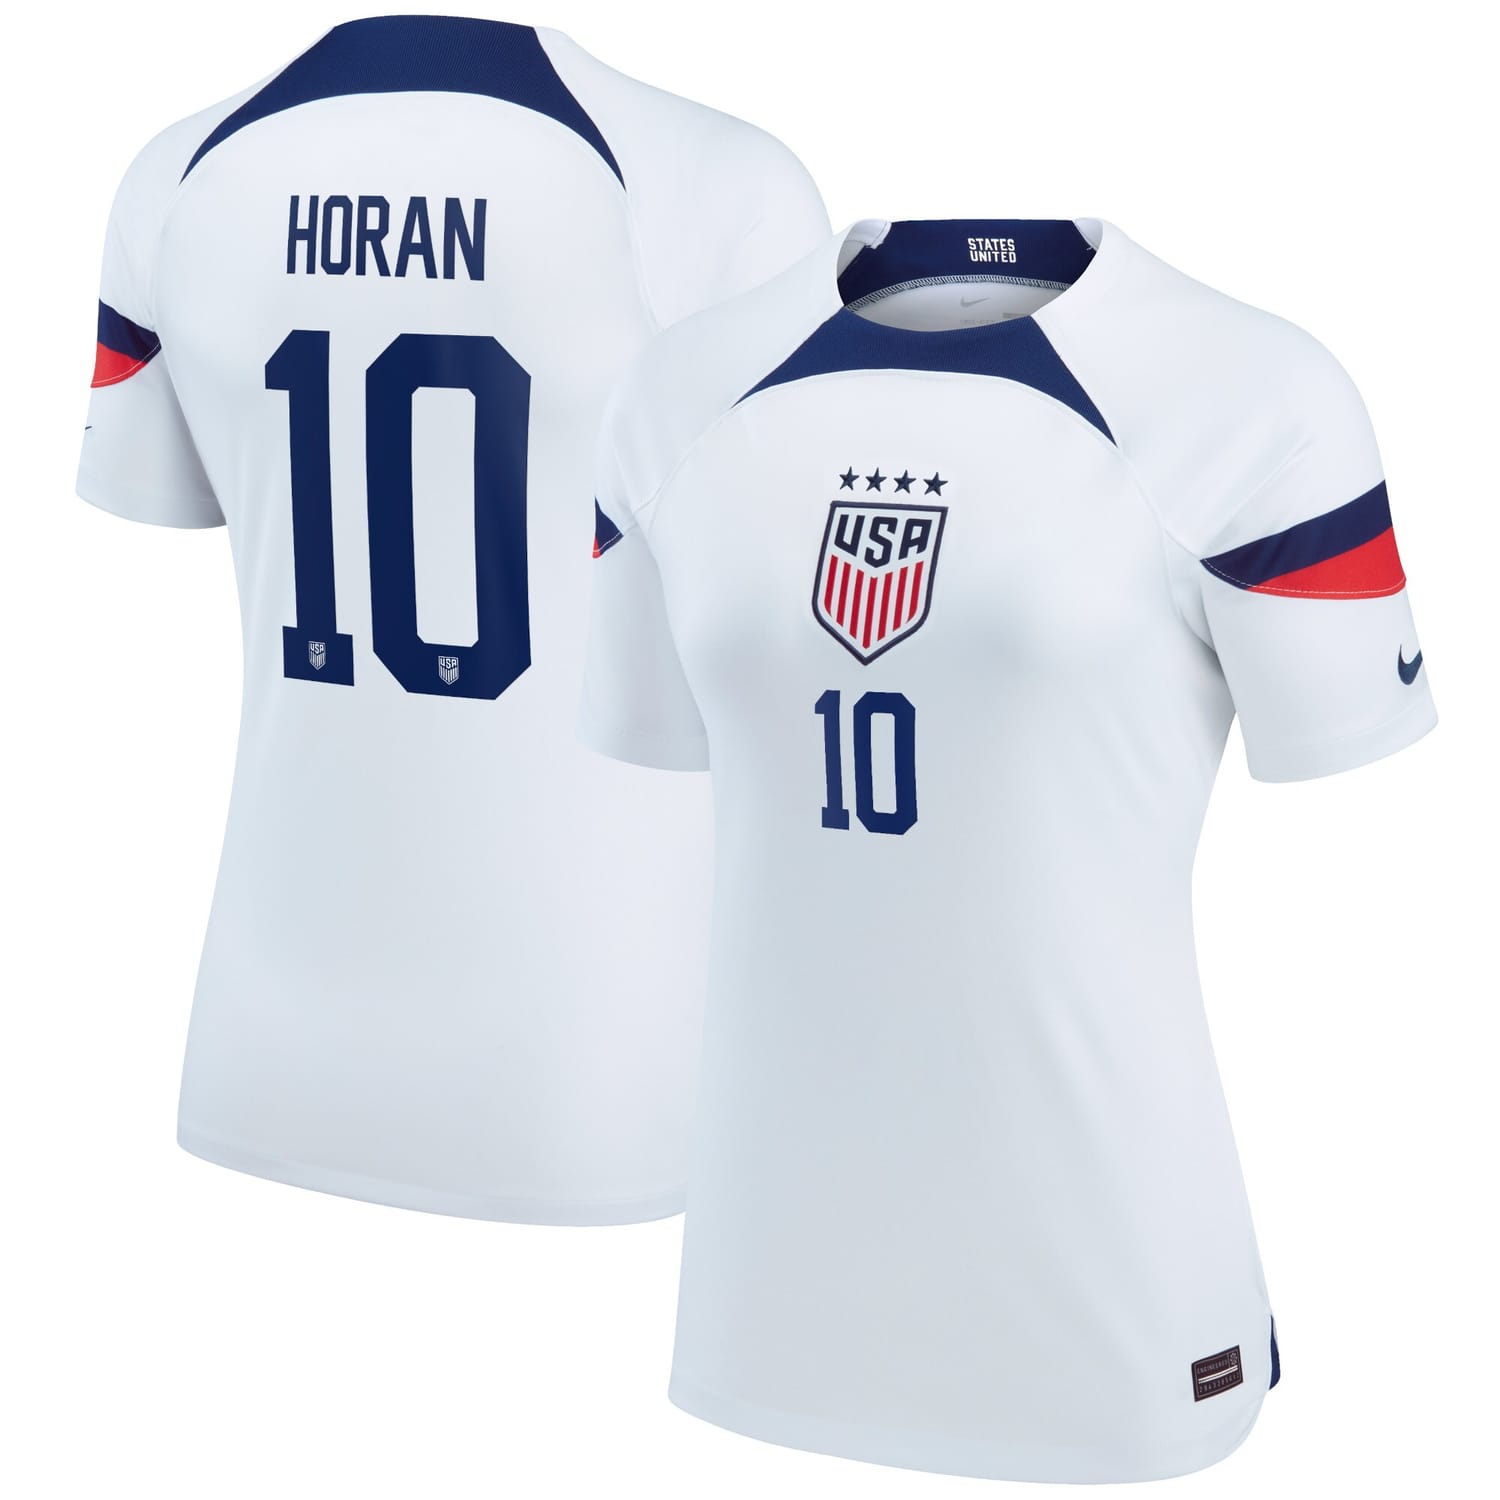 USWNT Home Jersey Shirt White 2022-23 player Lindsey Horan printing for Women